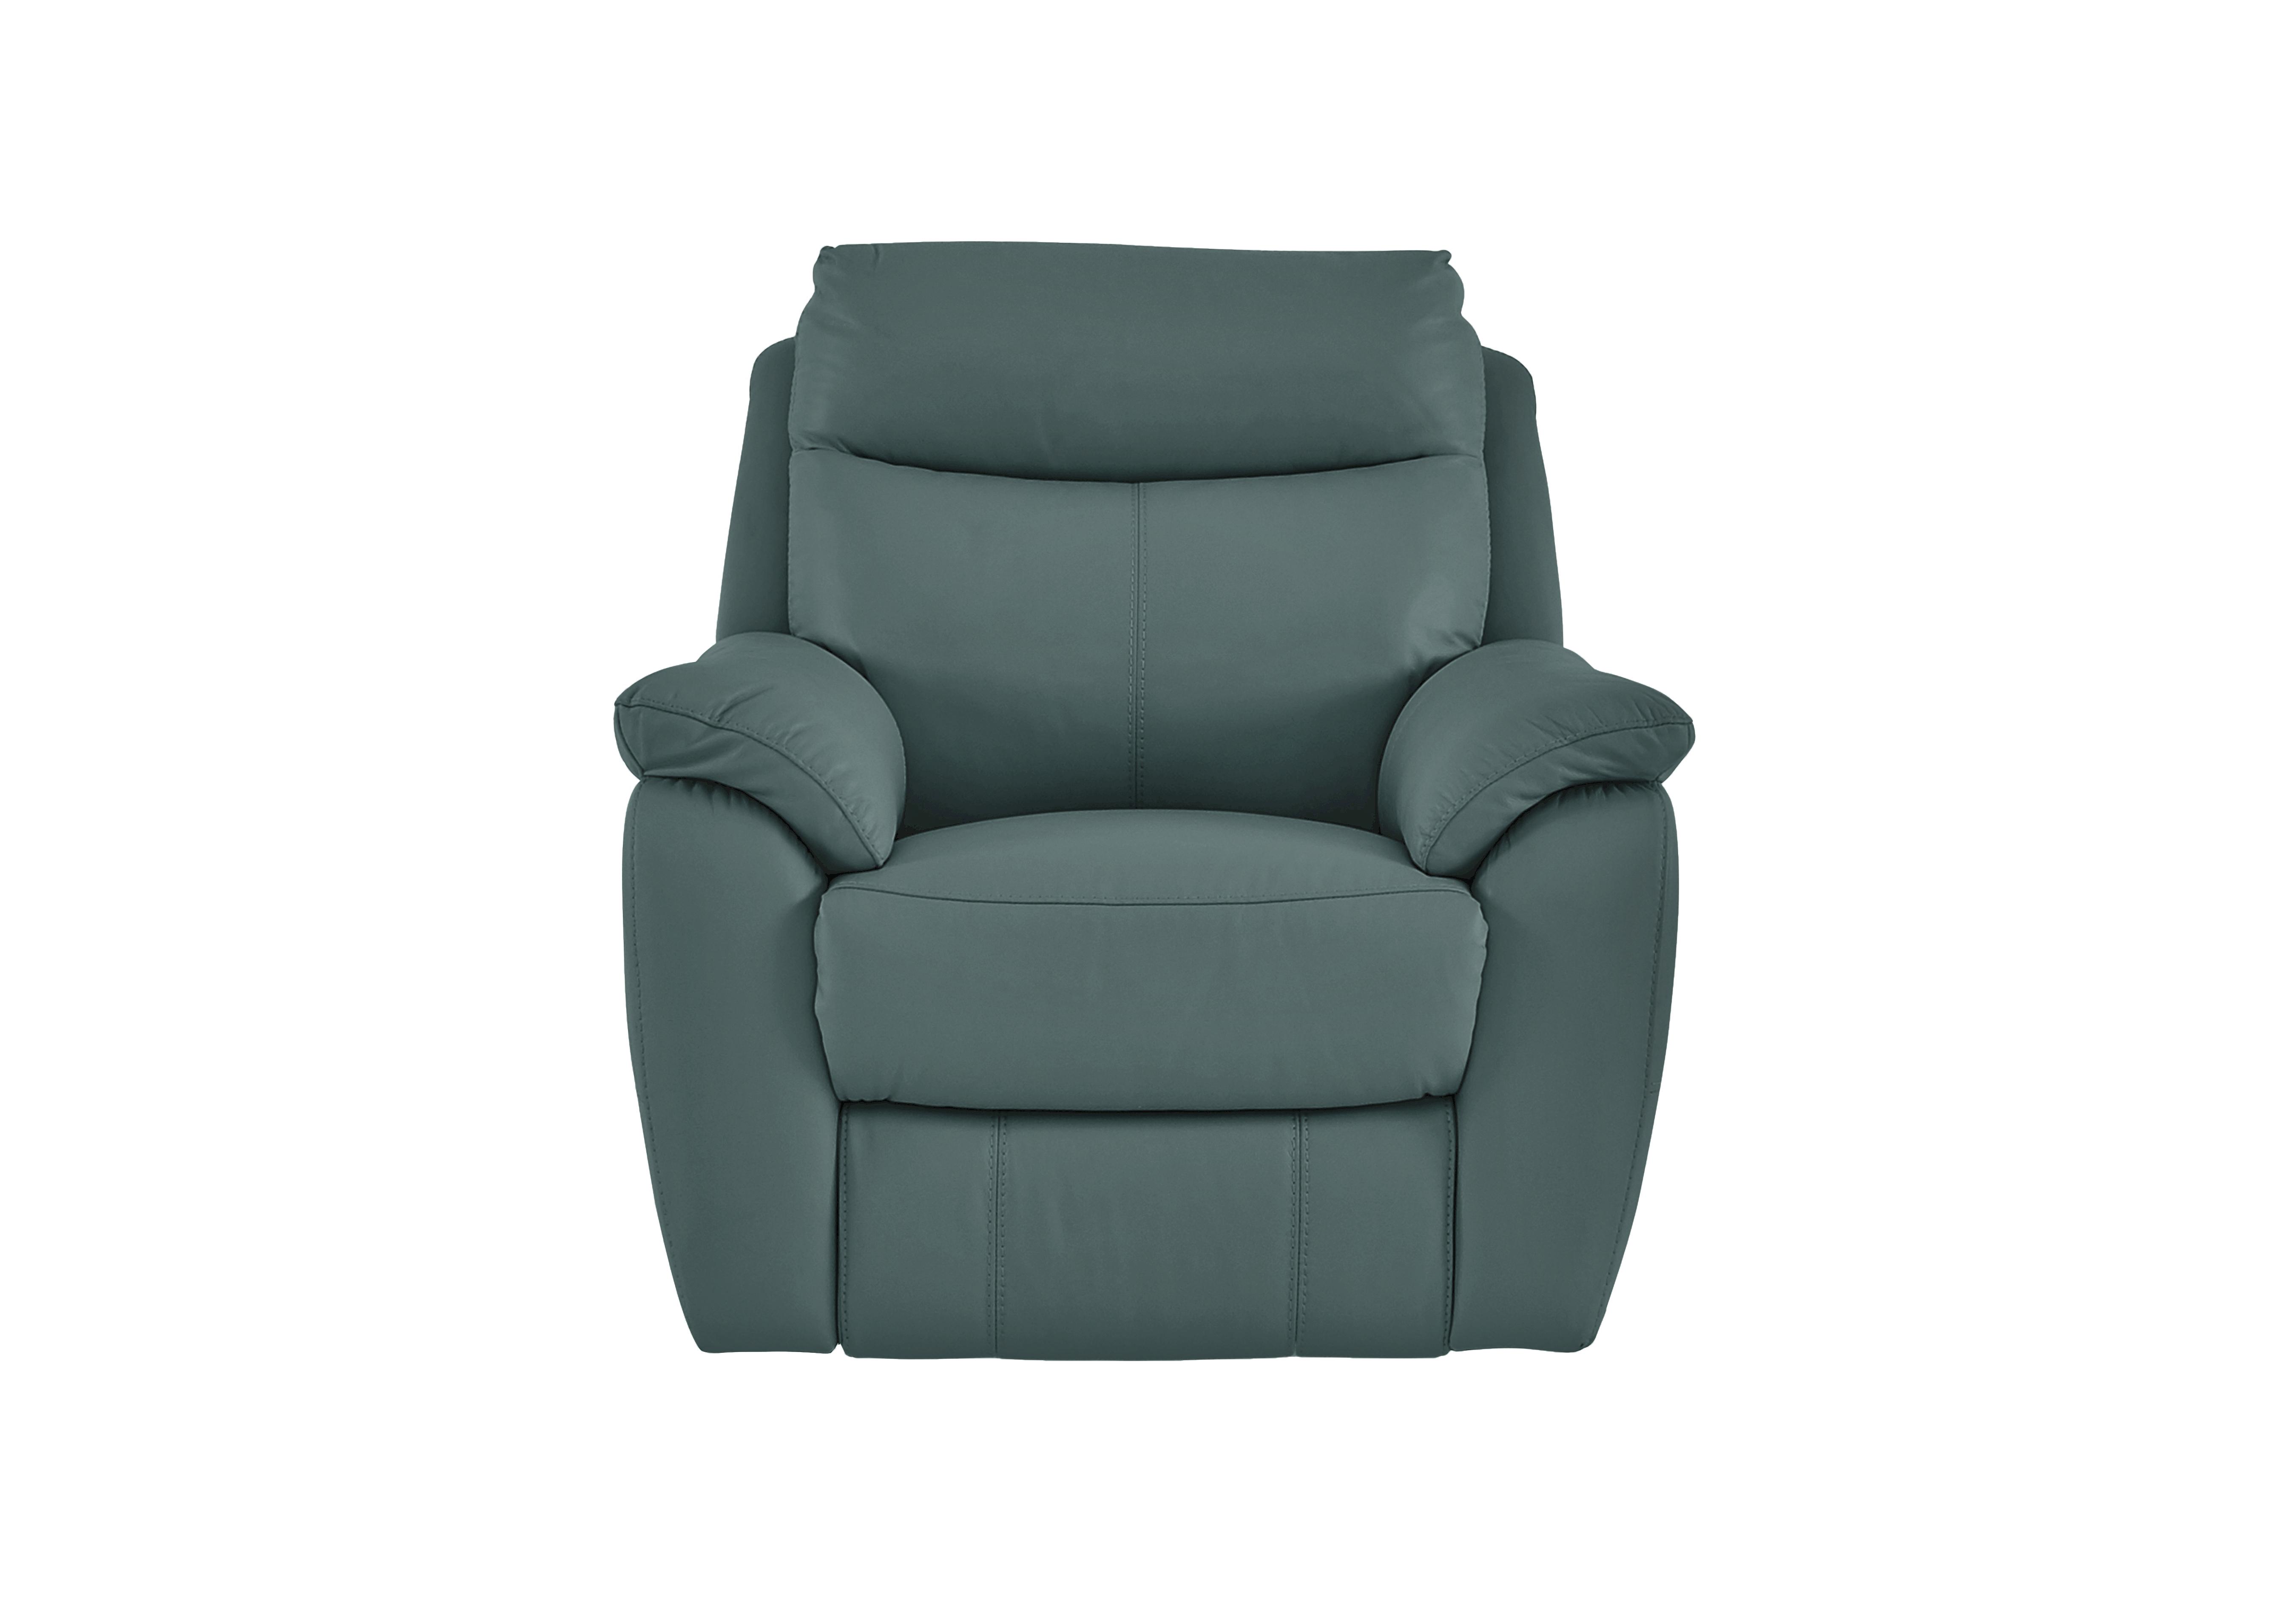 Snug Leather Armchair in Bv-301e Lake Green on Furniture Village